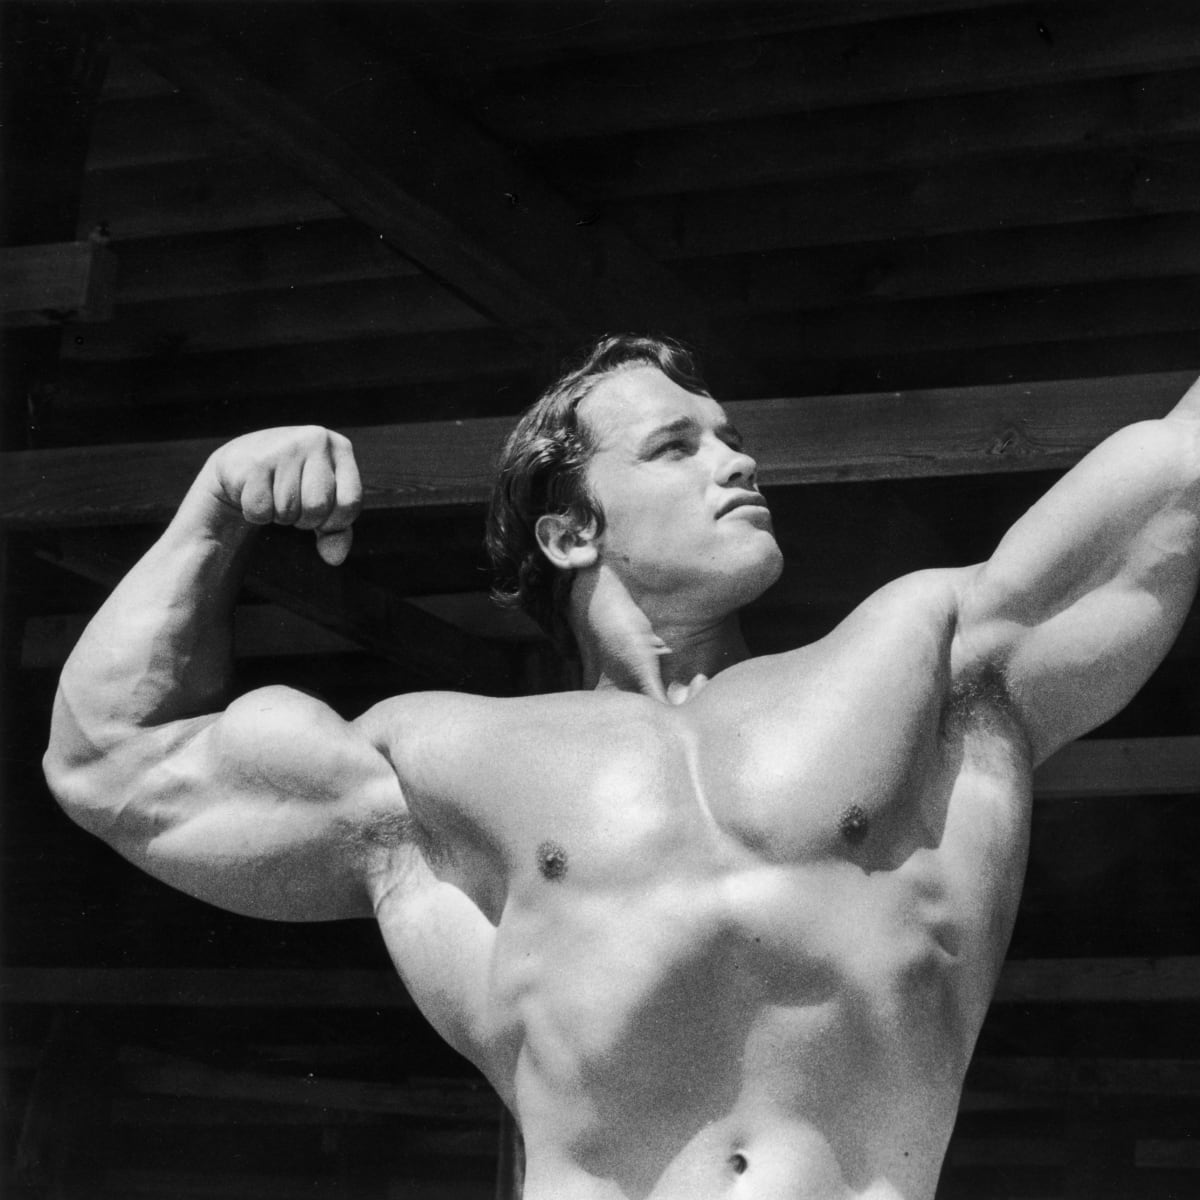 What songs would Arnold Schwarzenegger pose to? - Quora